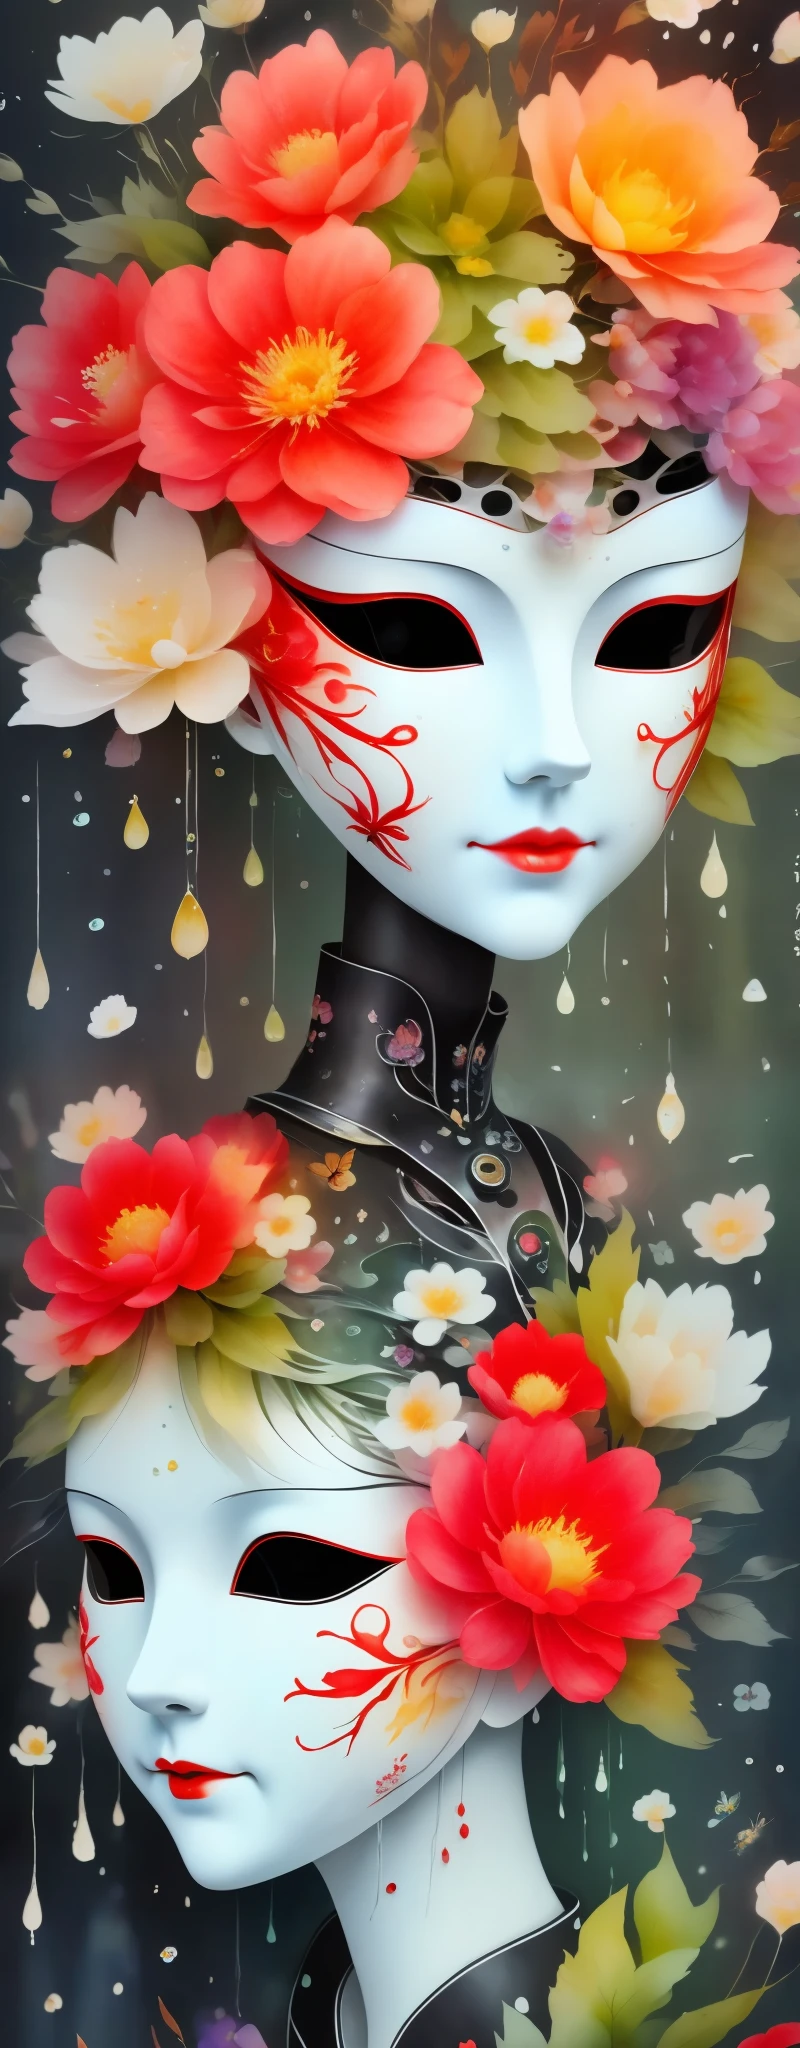 marionette，Mechanical doll，mask among flowers，White mask surrounded by flowers，3D mask，Metal，Cut-out mask，black，red，green，refracted light，light and shadow，Actual situation，perfect composition，